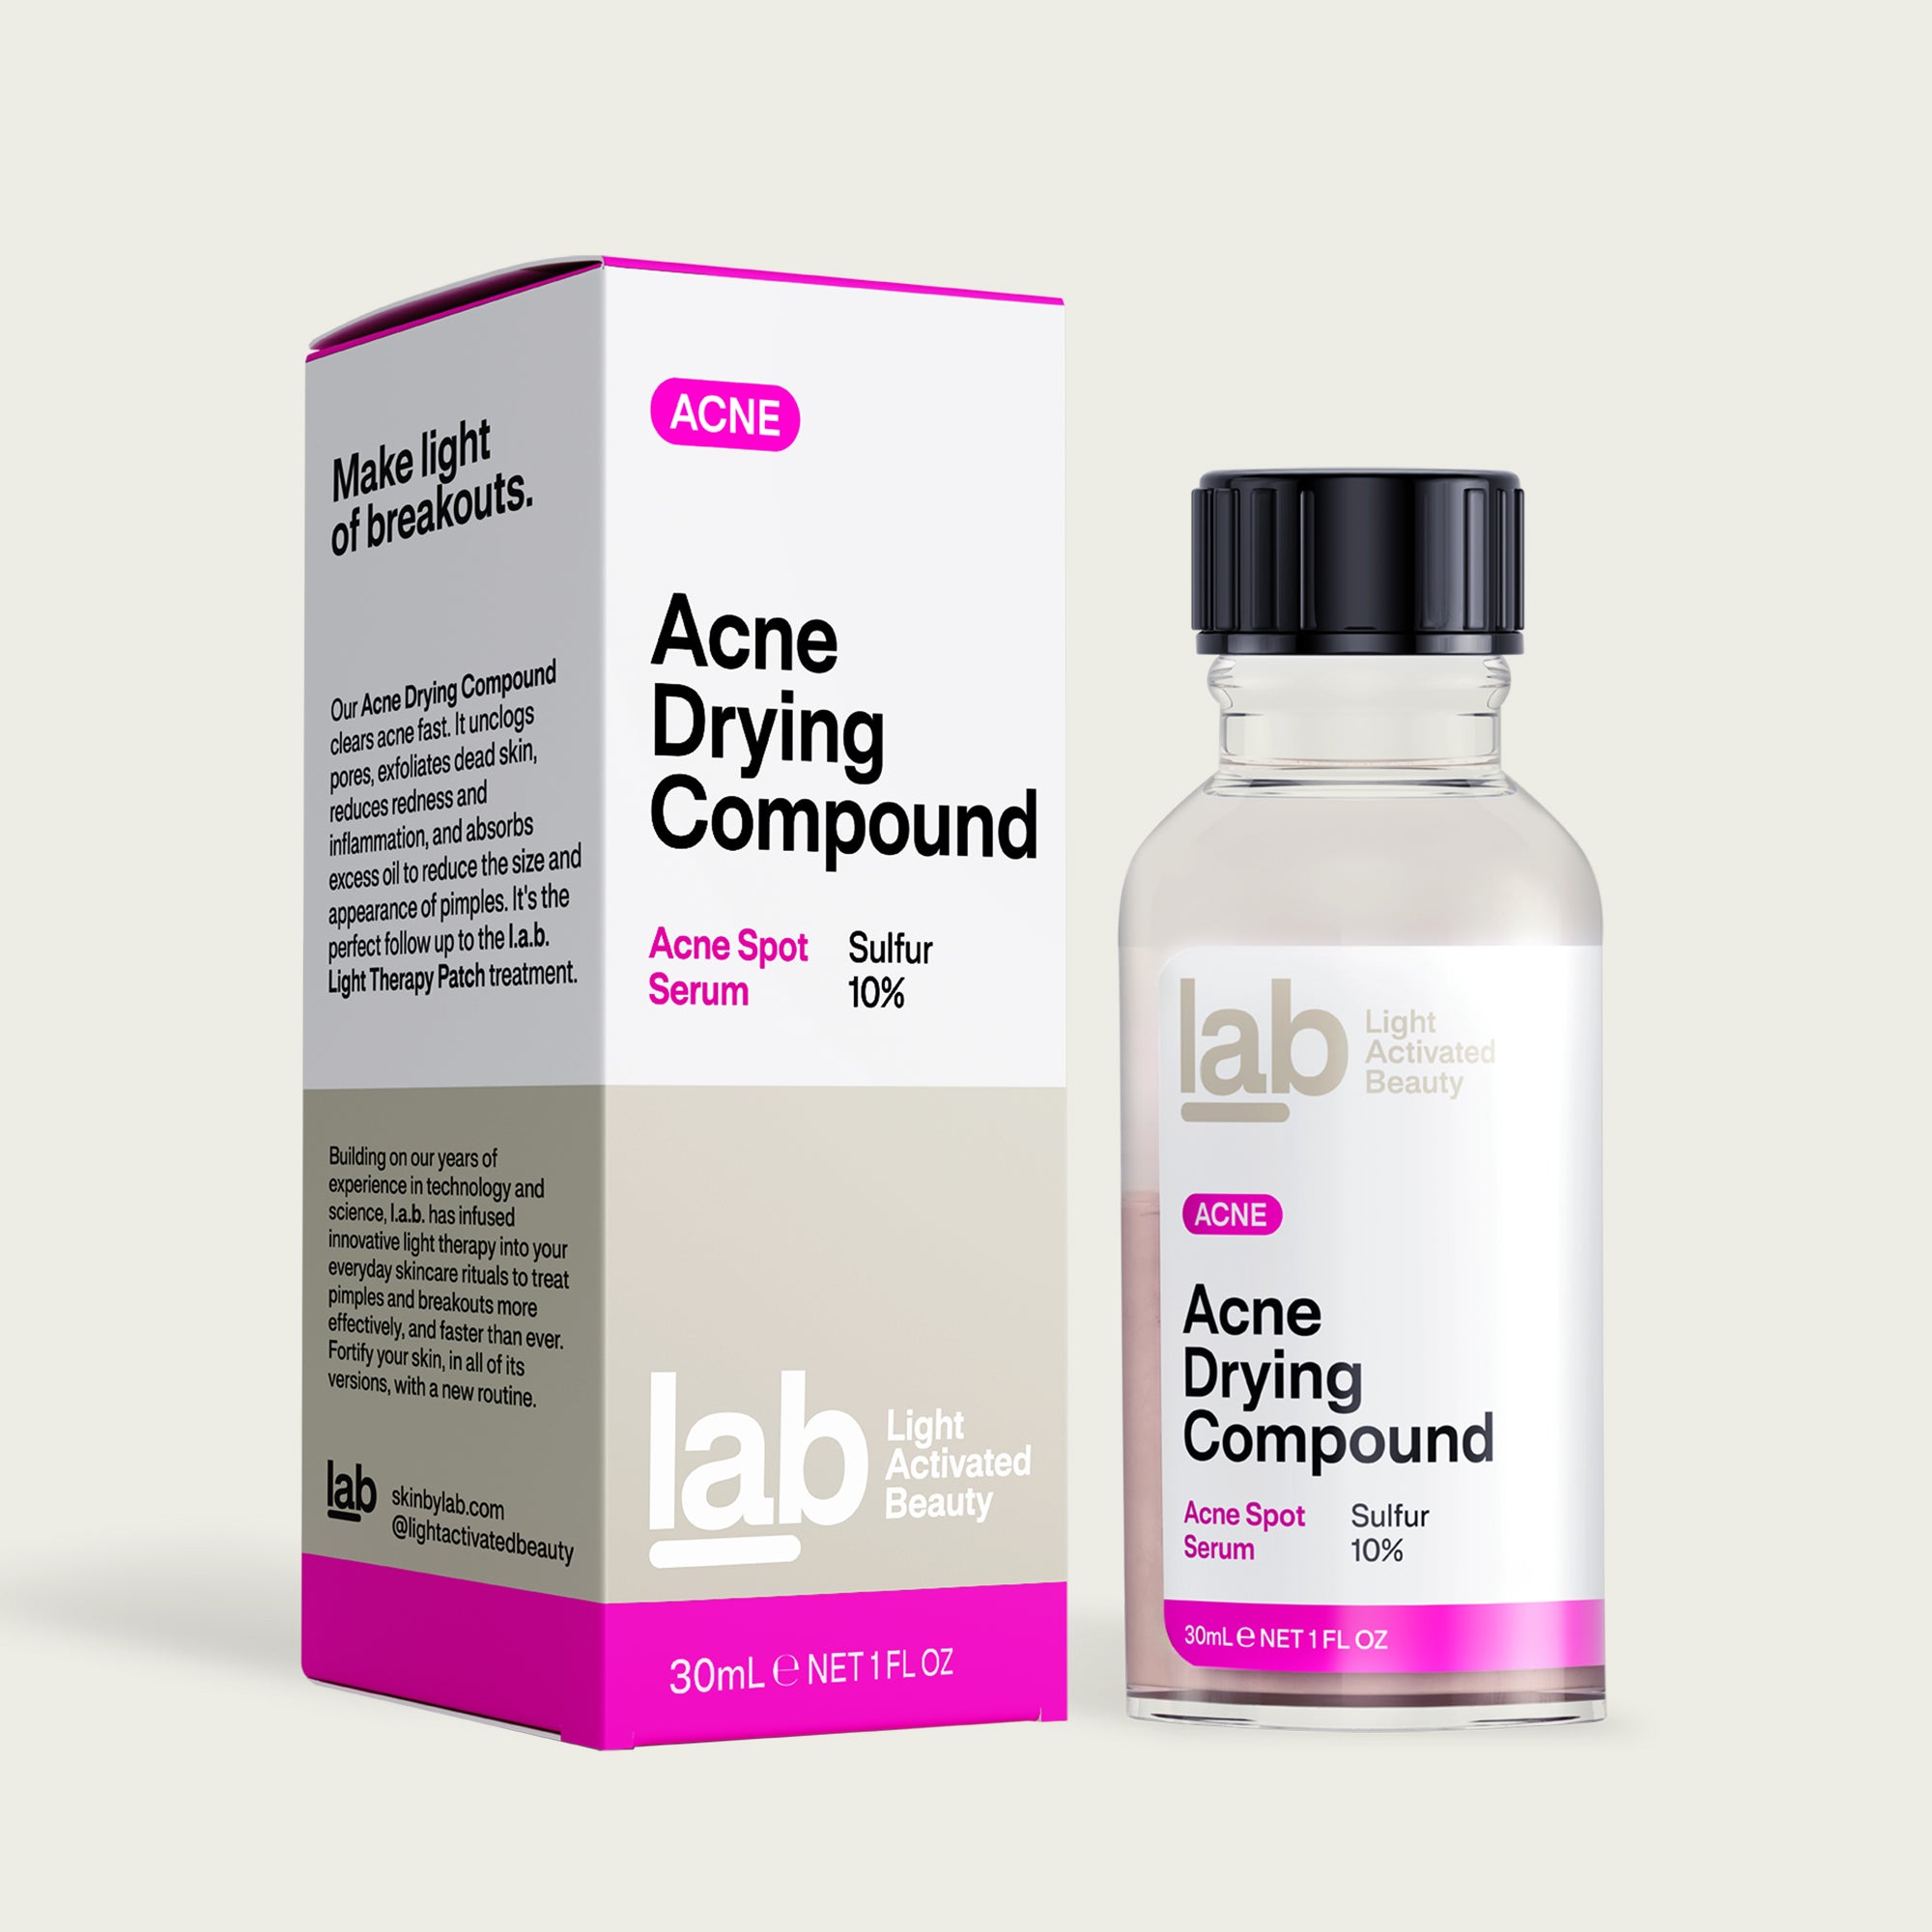 Acne Drying Compound